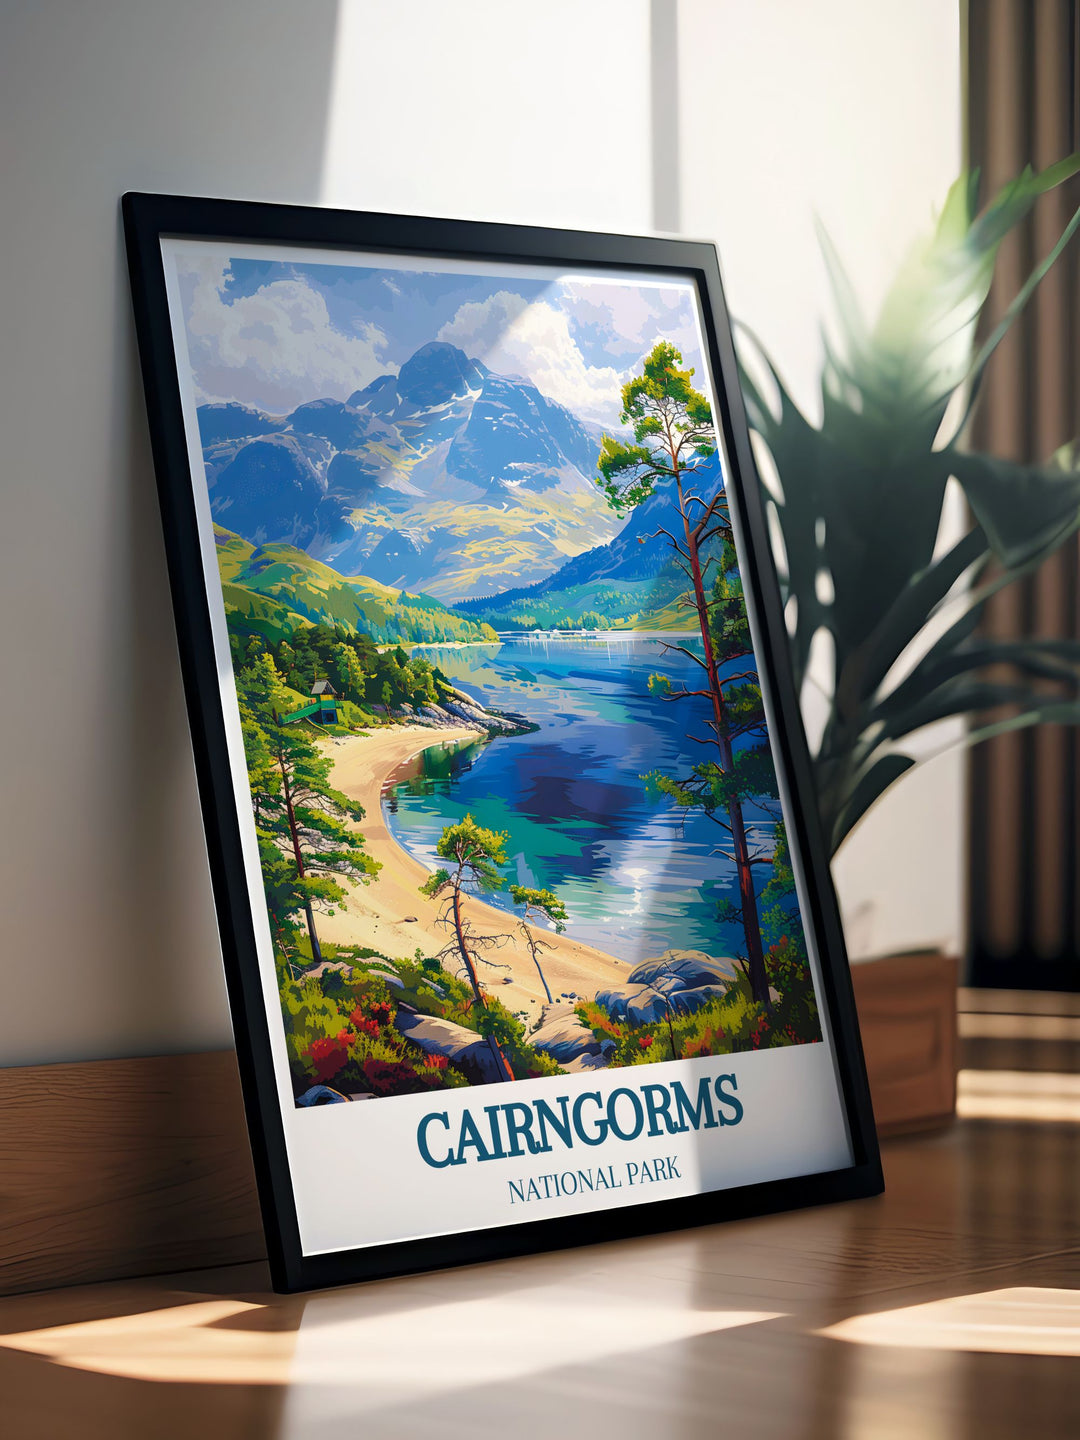 Highlighting the serene vistas of Cairngorms National Park and the bustling activity on Cairngorm Mountain, this travel poster is perfect for those who appreciate the scenic and historical richness of Scotland.